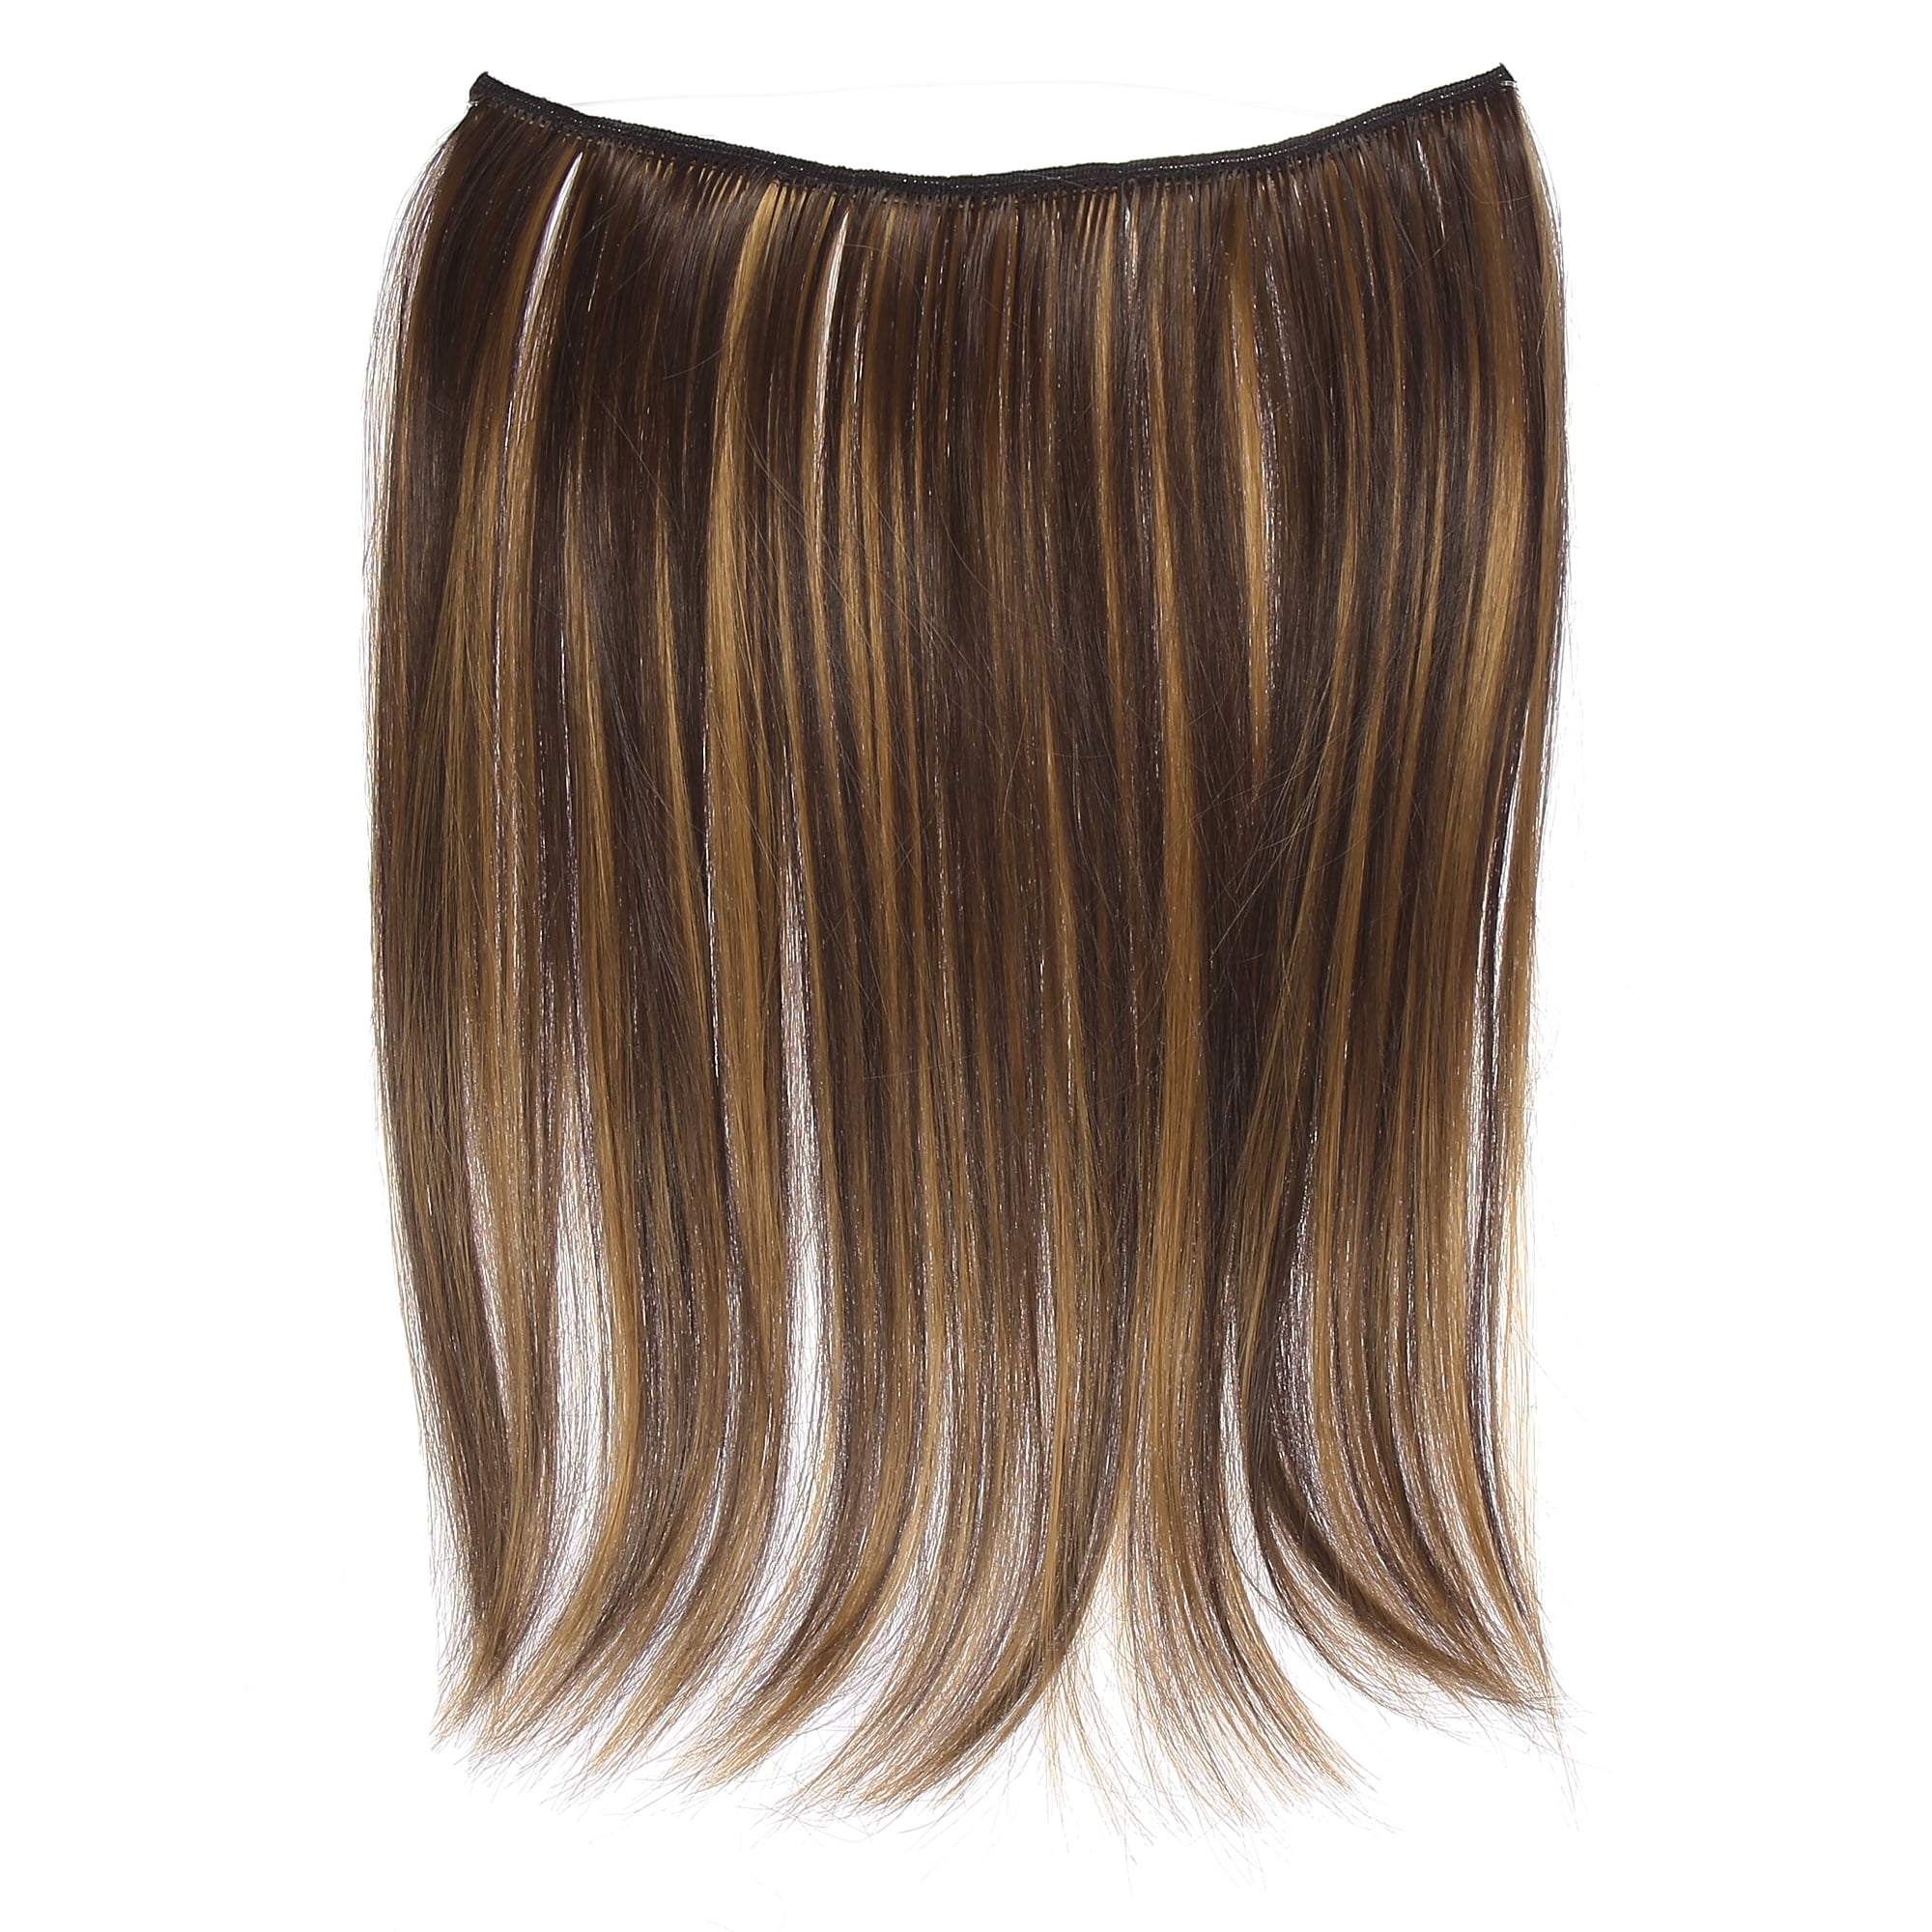 Jsaierl Long Straight Brown Mixed Blonde Synthetic Wigs for Women Middle Part Highlights, Size: One size, Gold